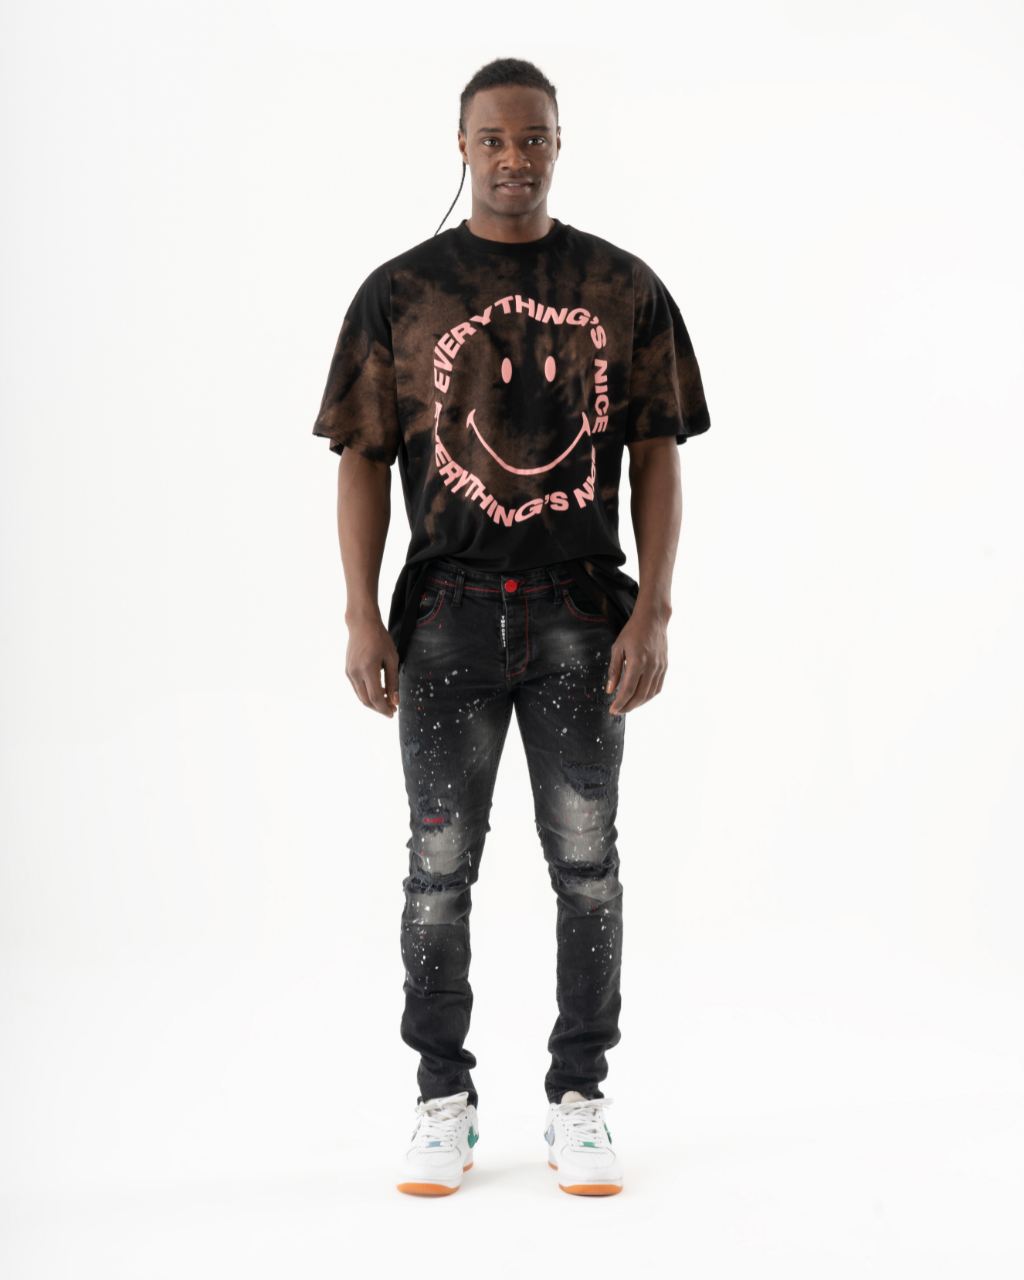 A man wearing ripped jeans and a HOTSPOT t-shirt.